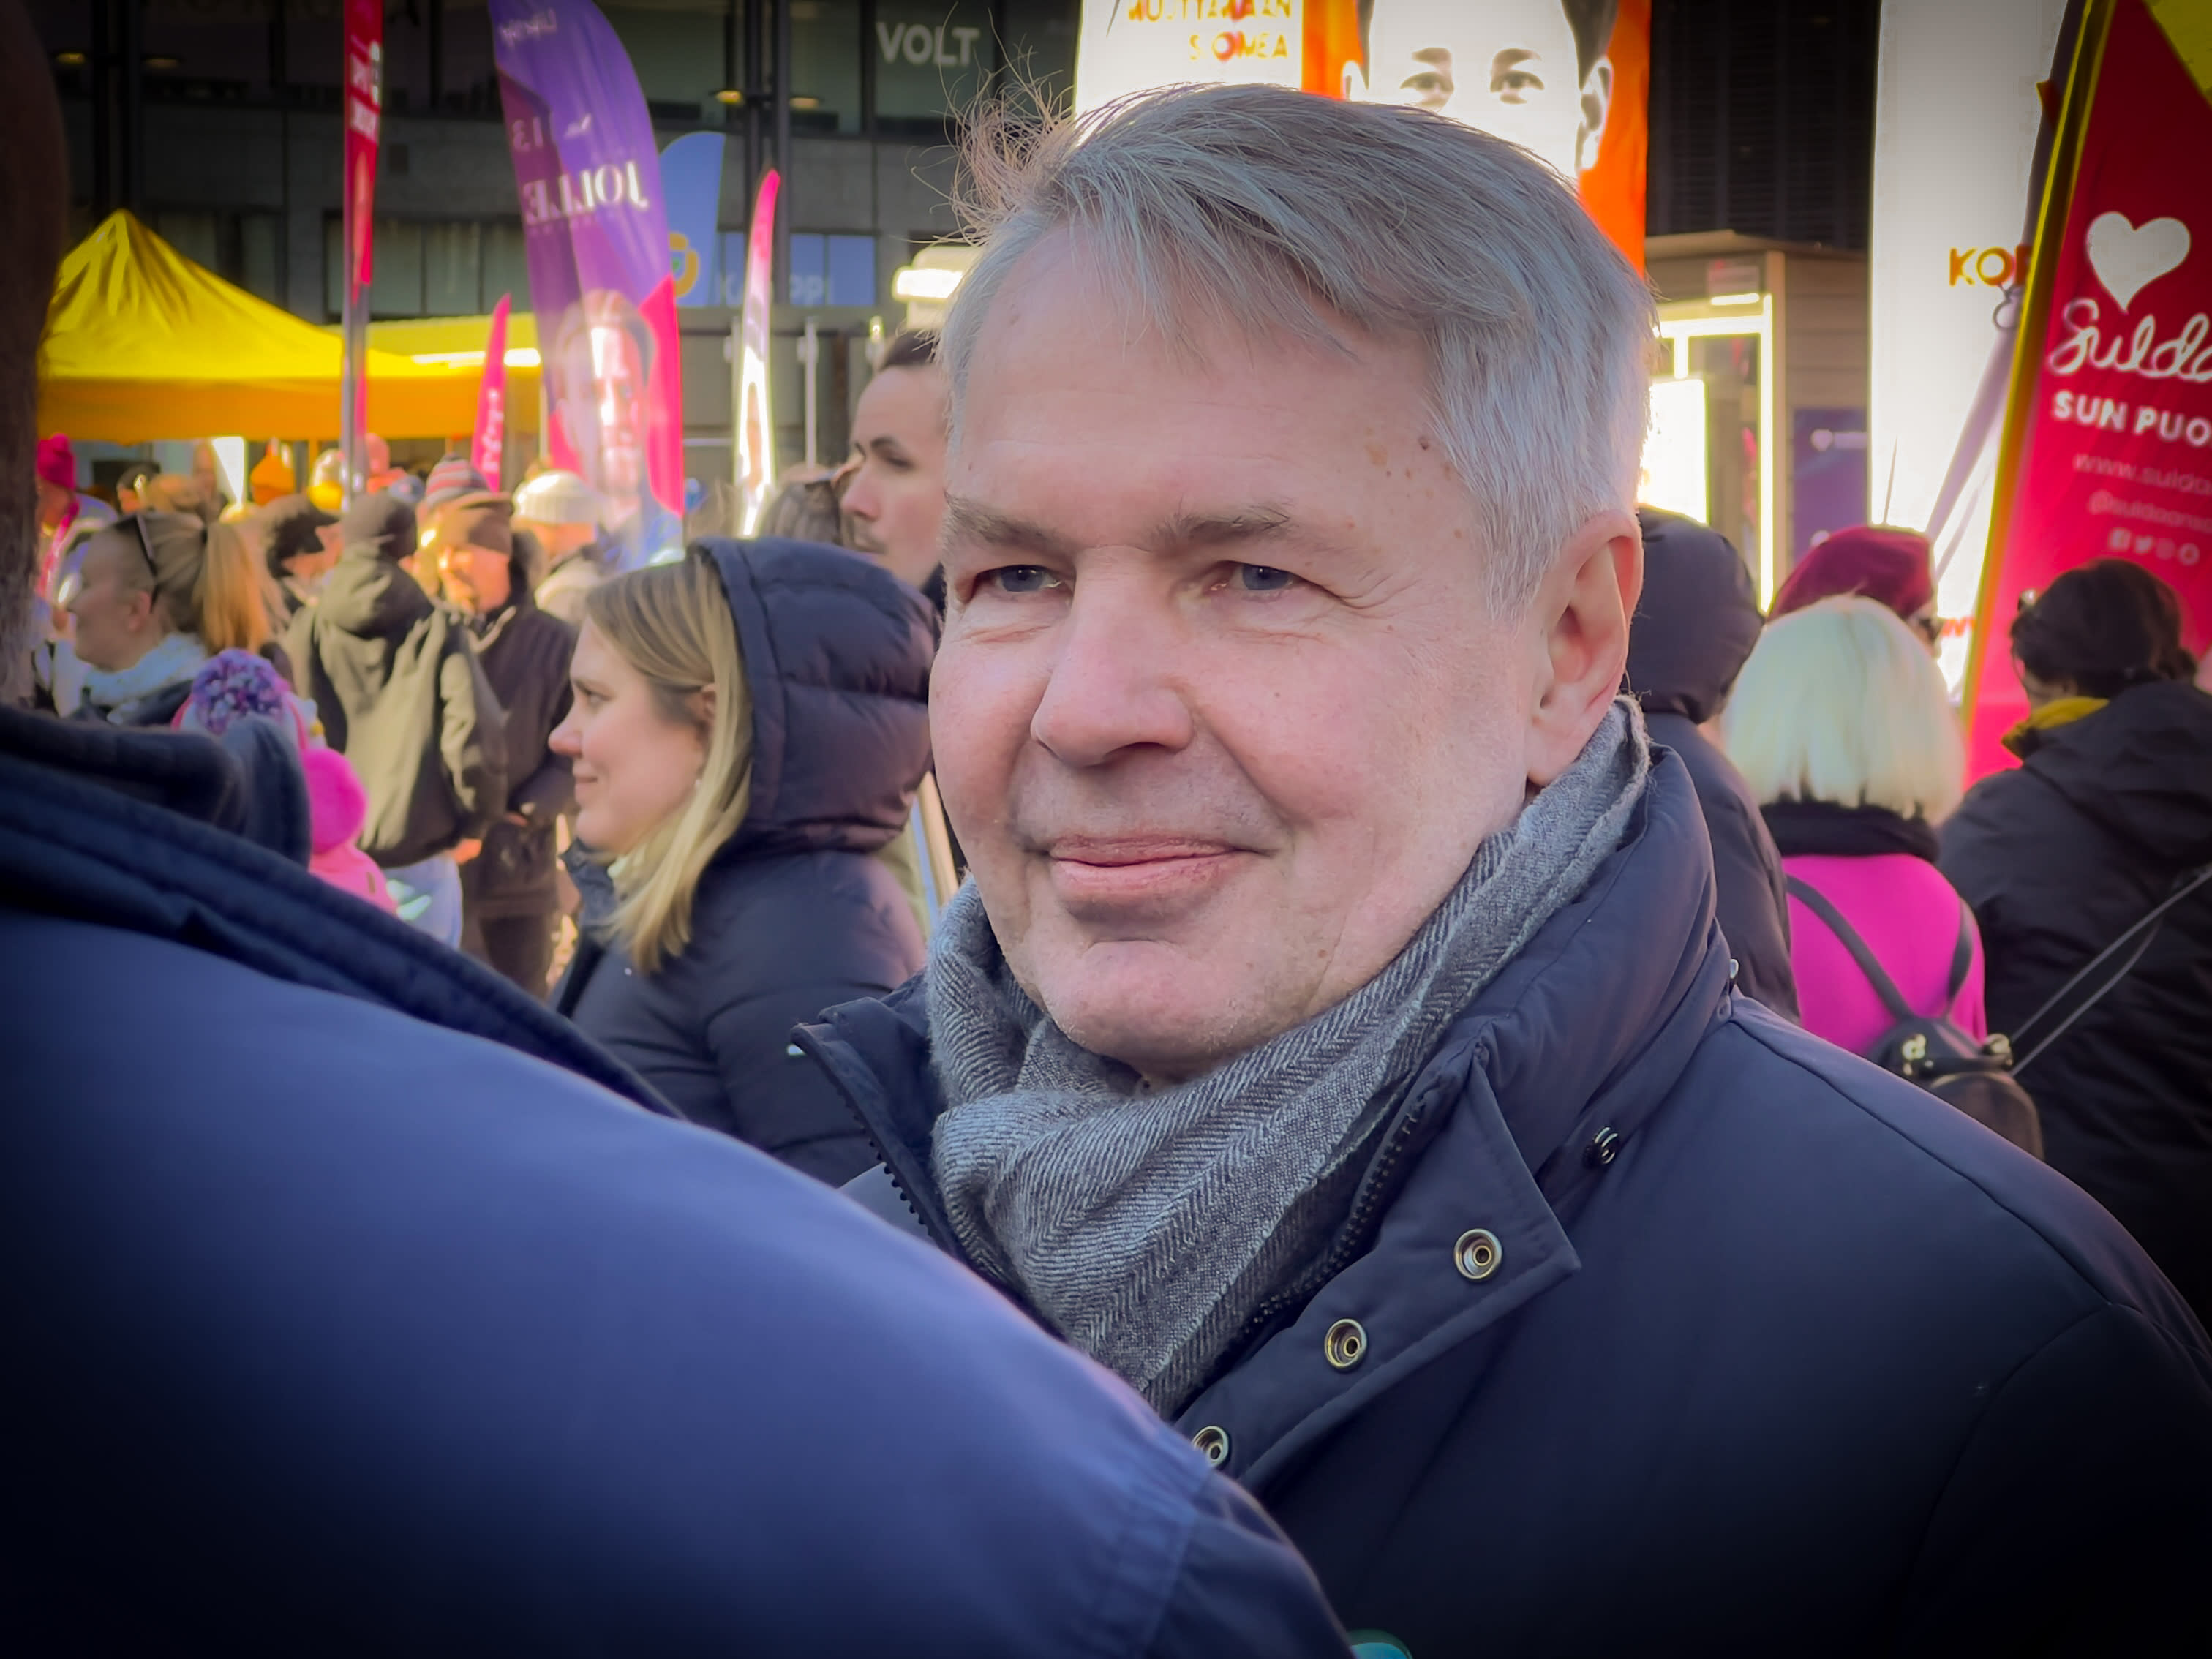 Foreign Minister Haavisto topped the poll for the next president of Finland